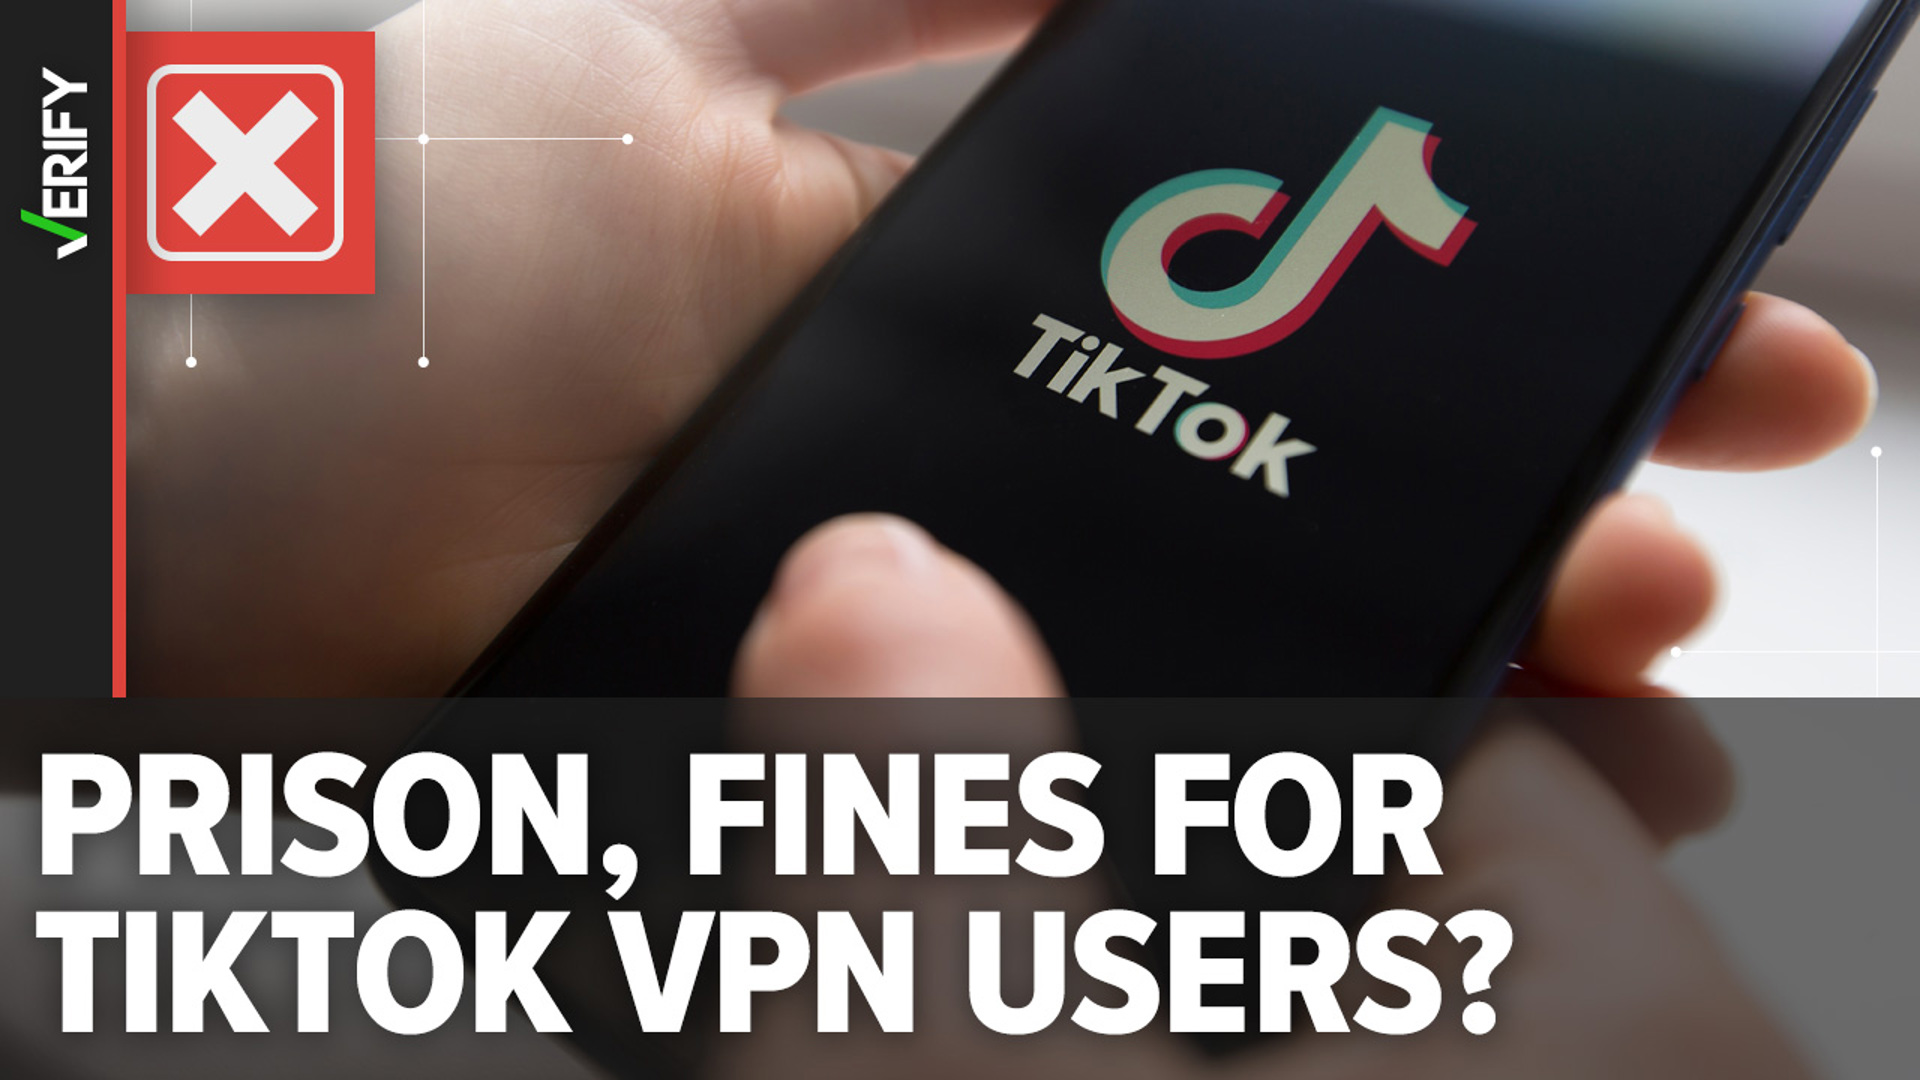 Contrary to claims on viral posts, TikTok users won’t face prison time or steep fines if they use a virtual private network to access the app after it’s banned.